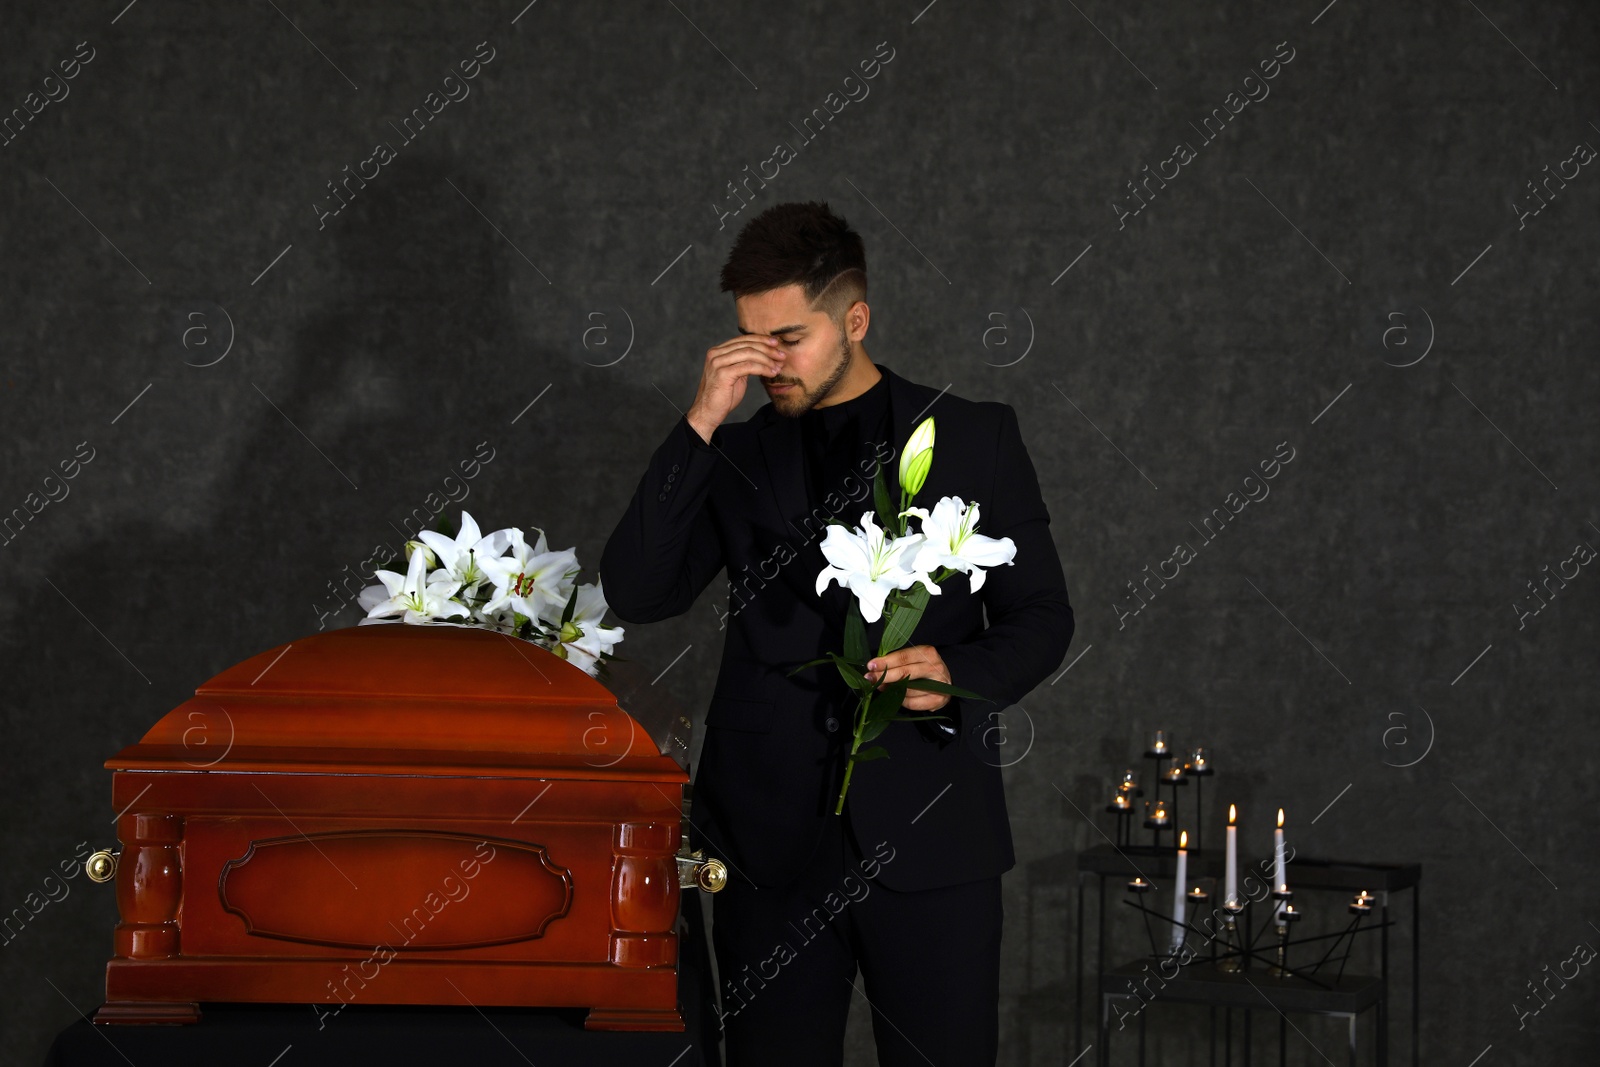 Photo of Sad young man with white lilies near casket in funeral home